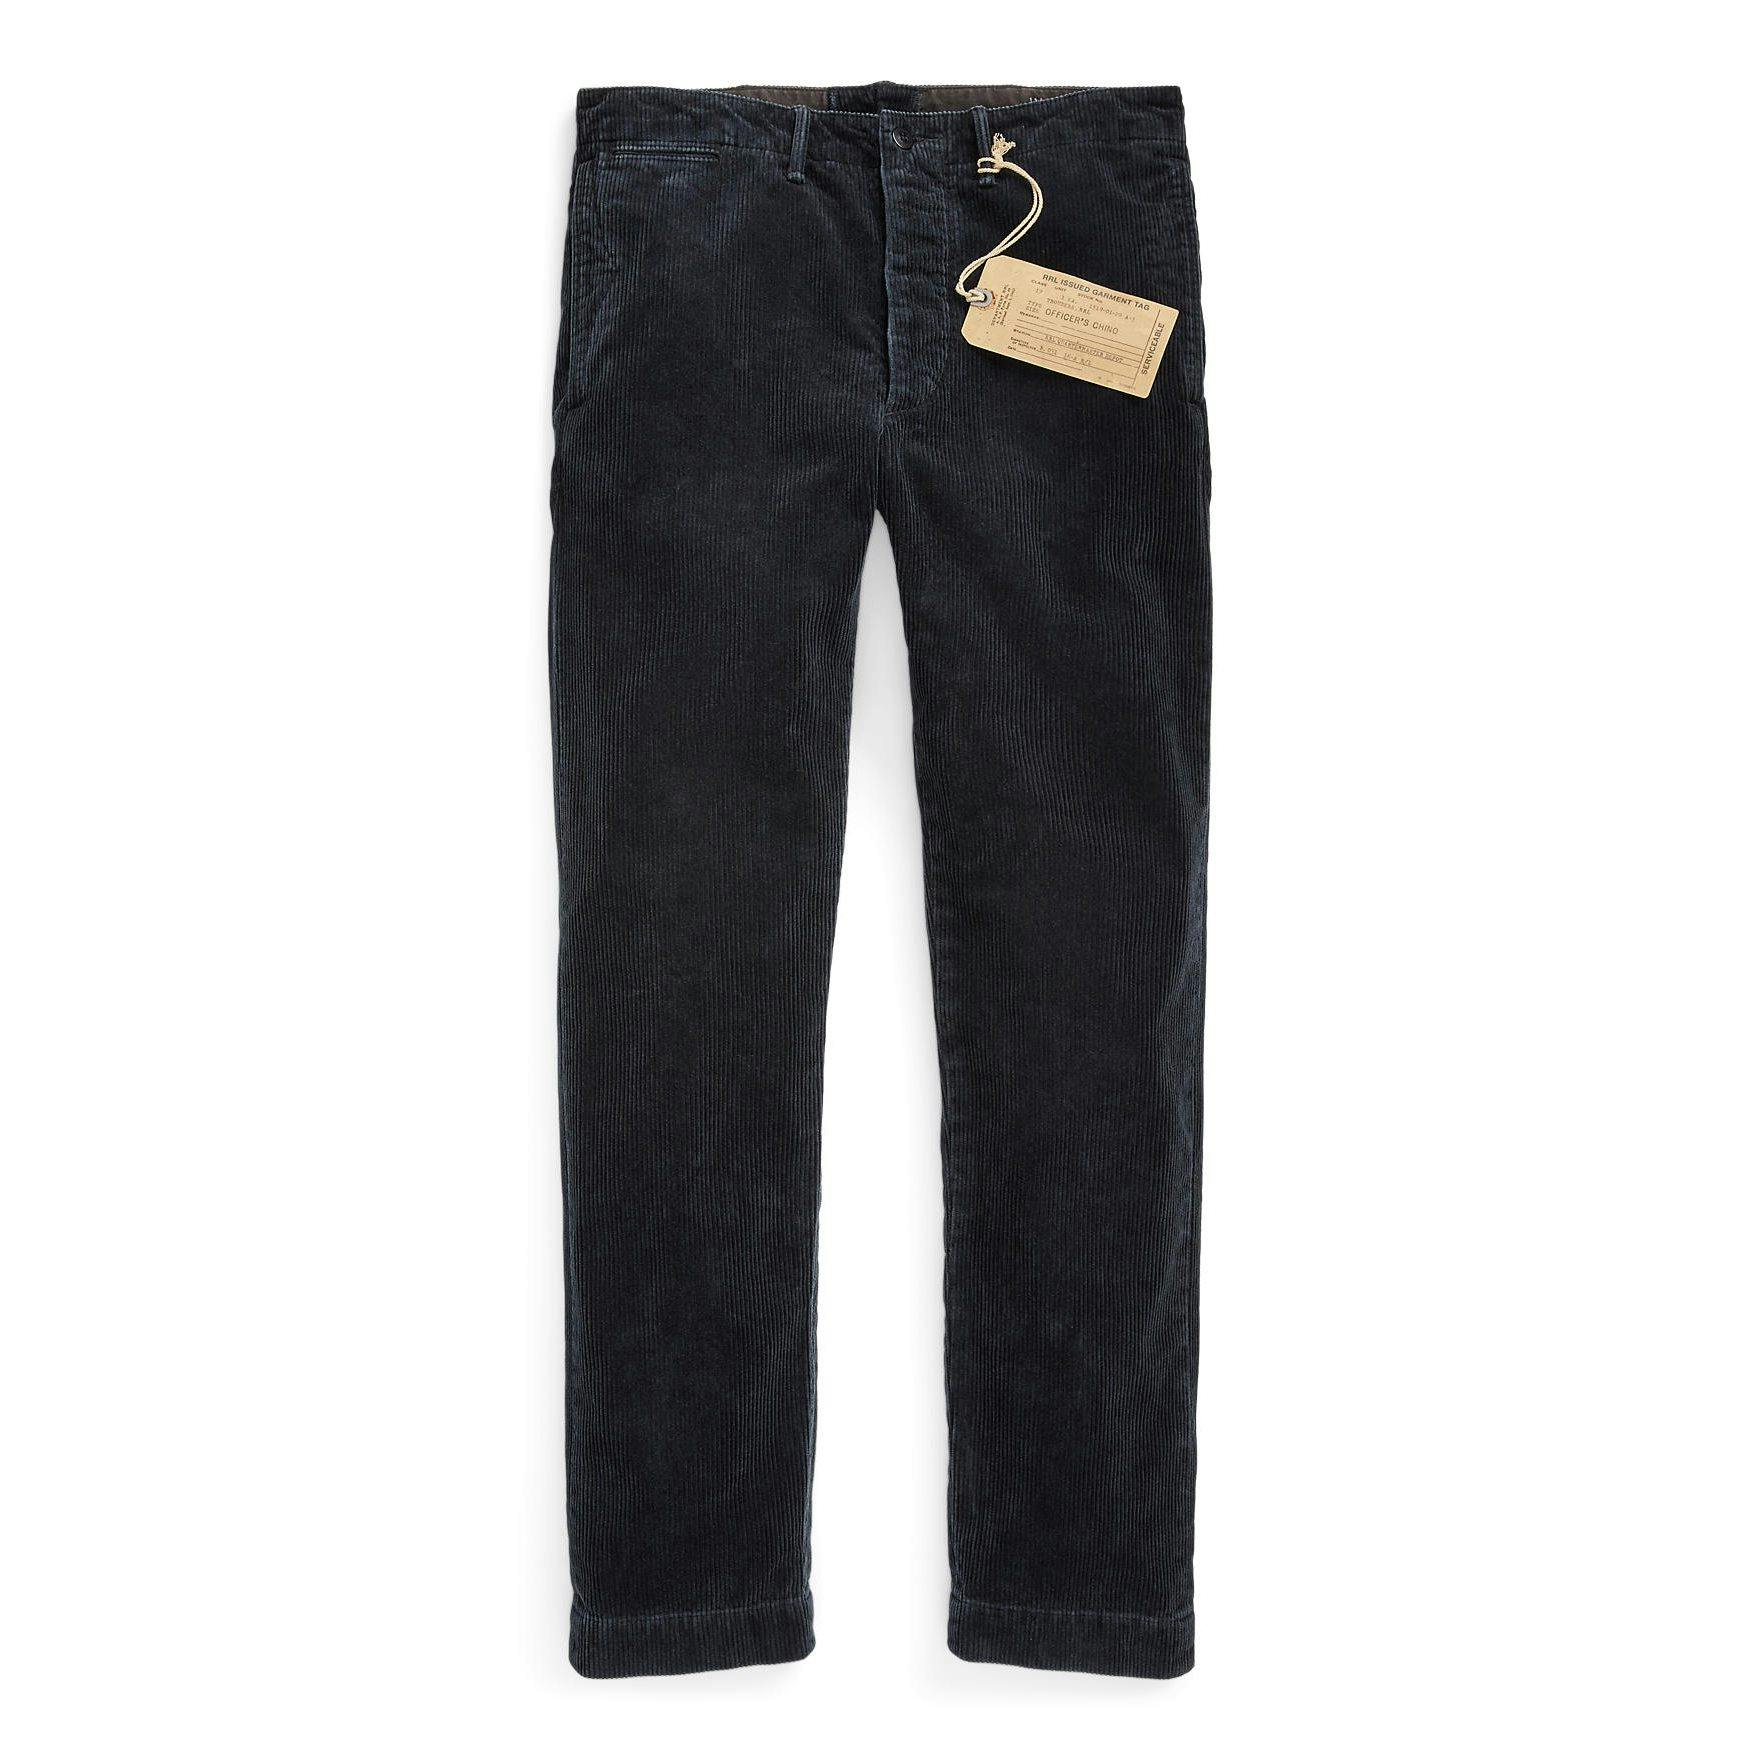 RRL Officer's Corduroy Straight Fit Chino Pant - Black, Casual Pants